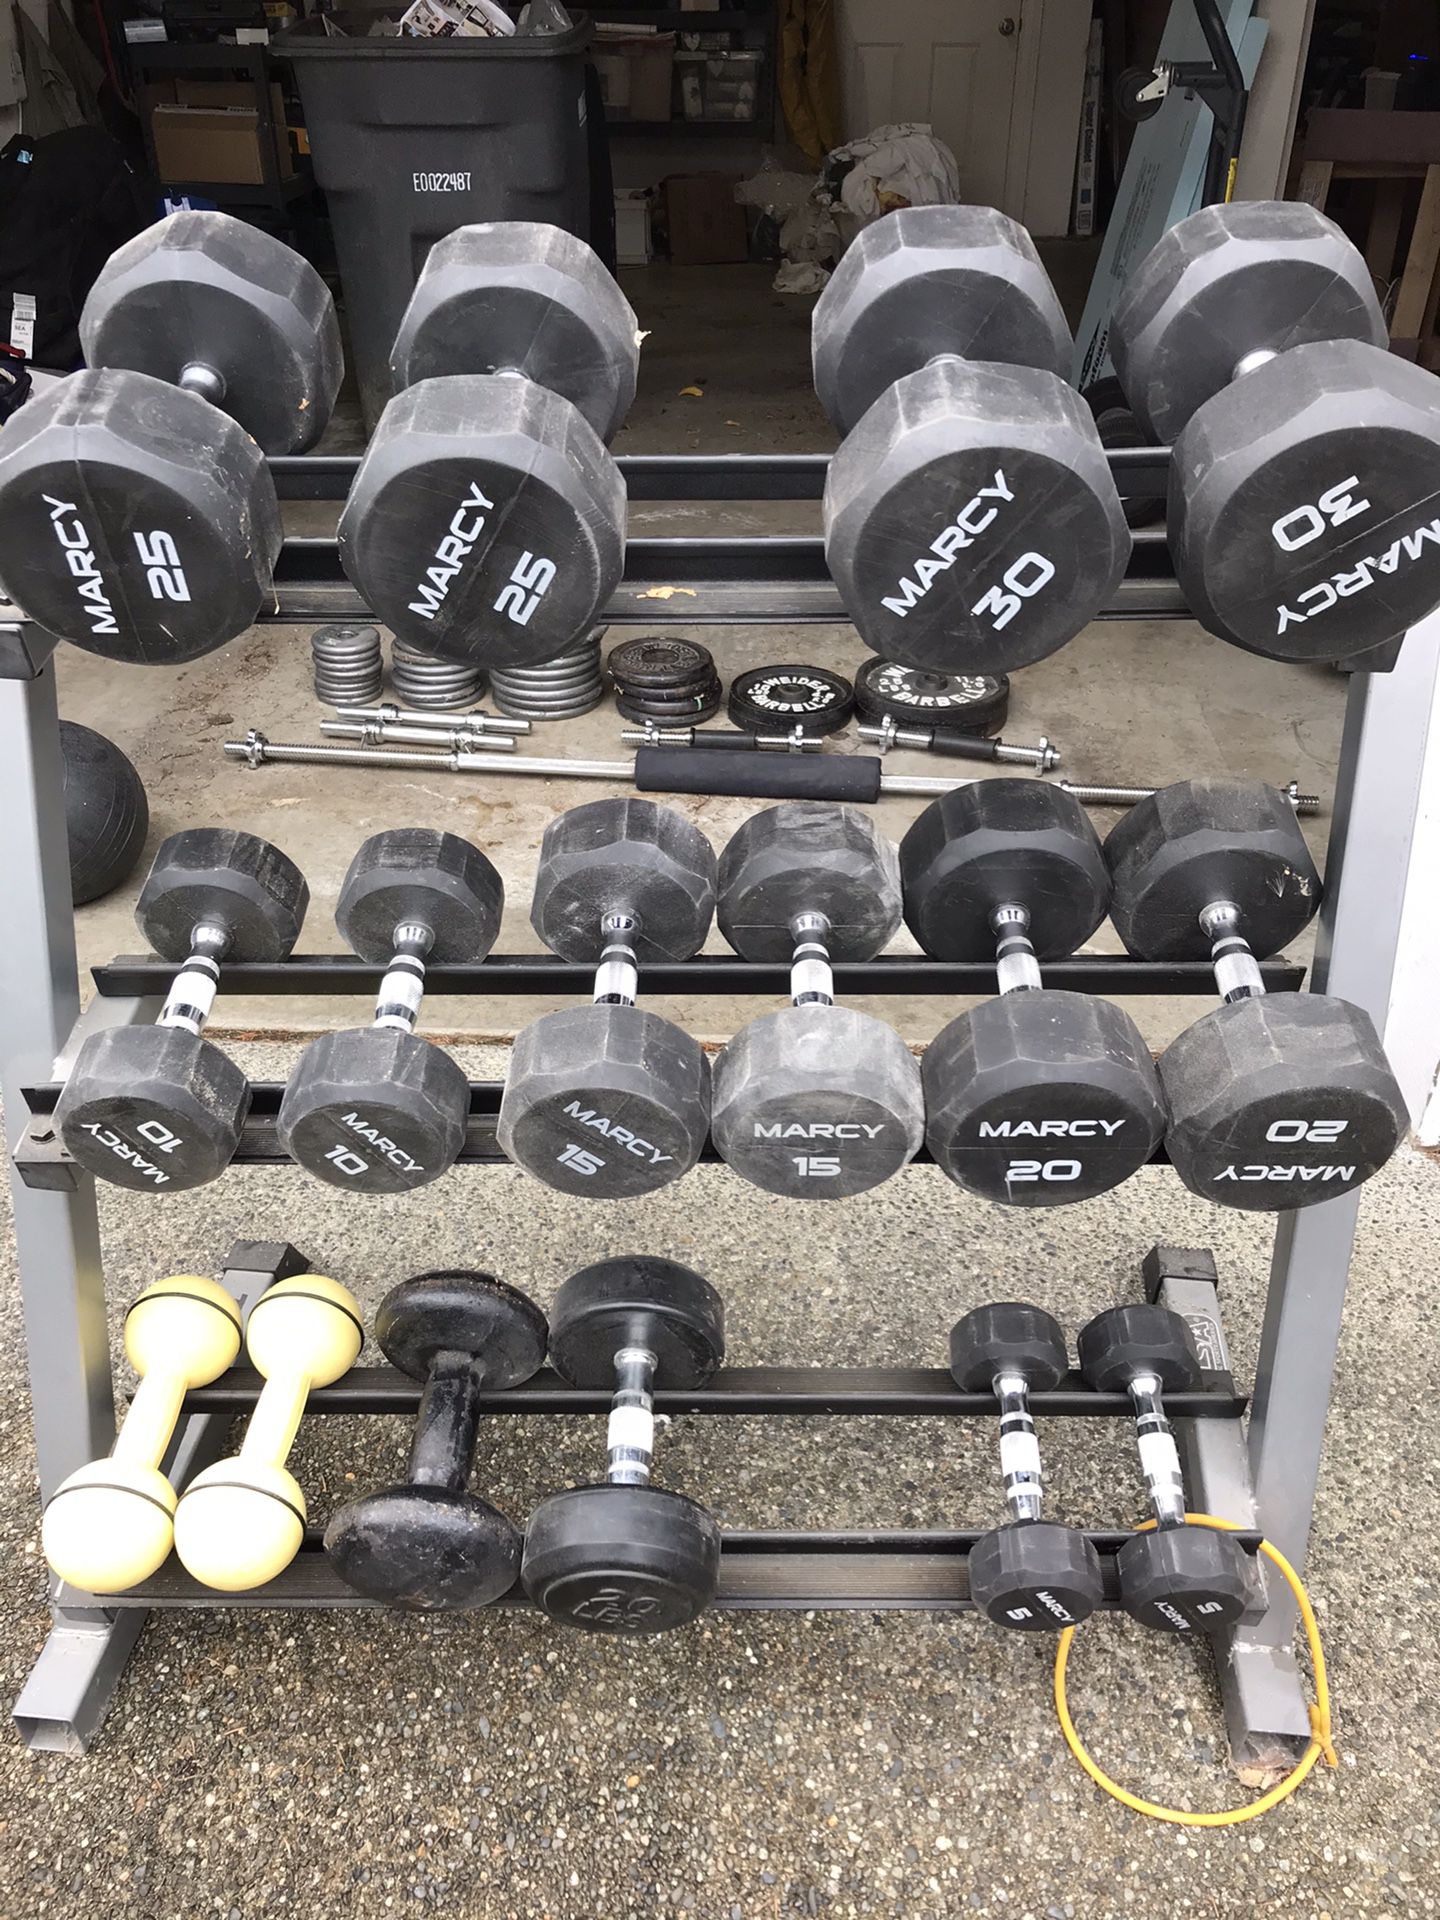 Weight set and rack